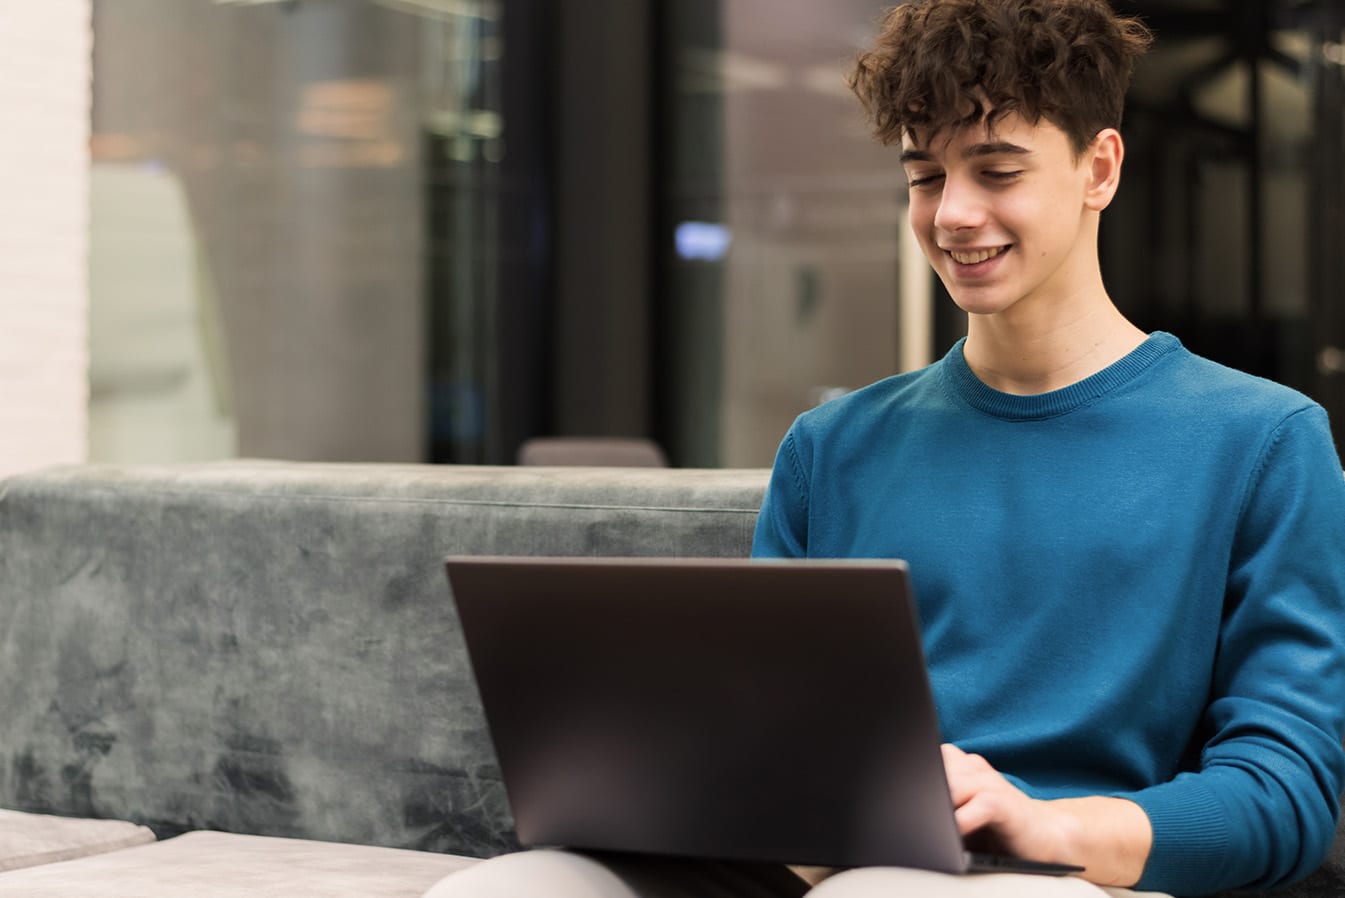 Young man smiling while using laptop